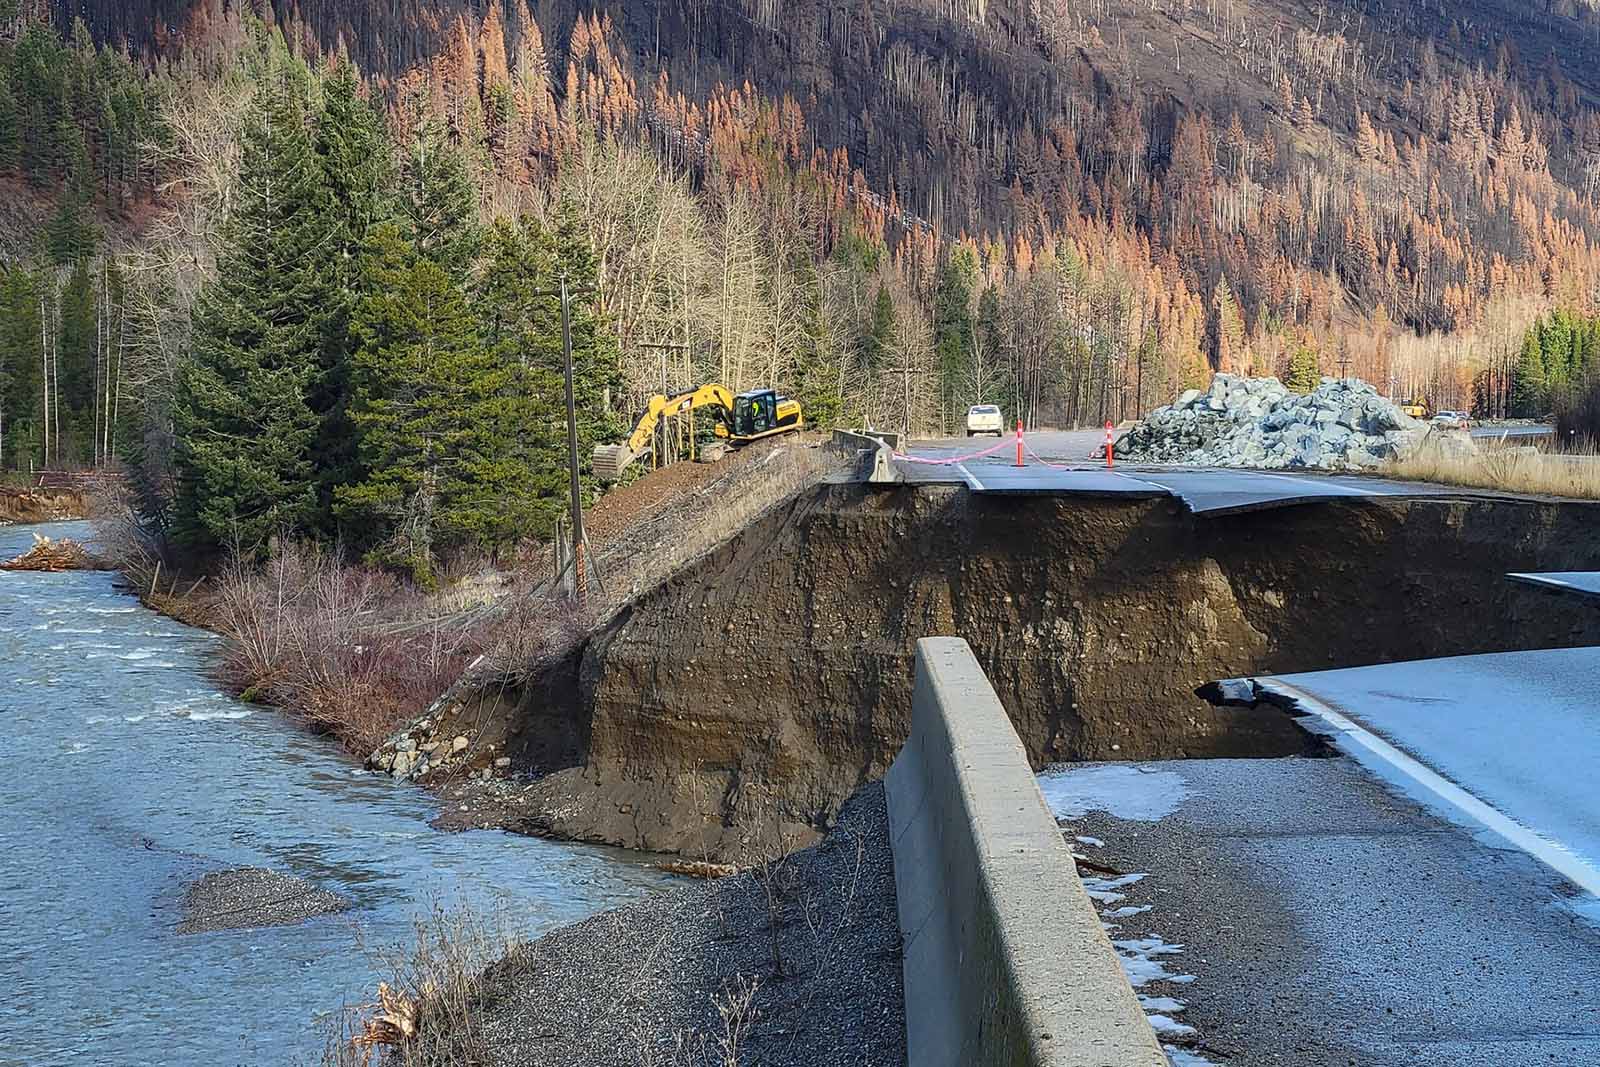 Highway with a piece of road missing due to the erosion of the ground under. A river is under and beside the road.